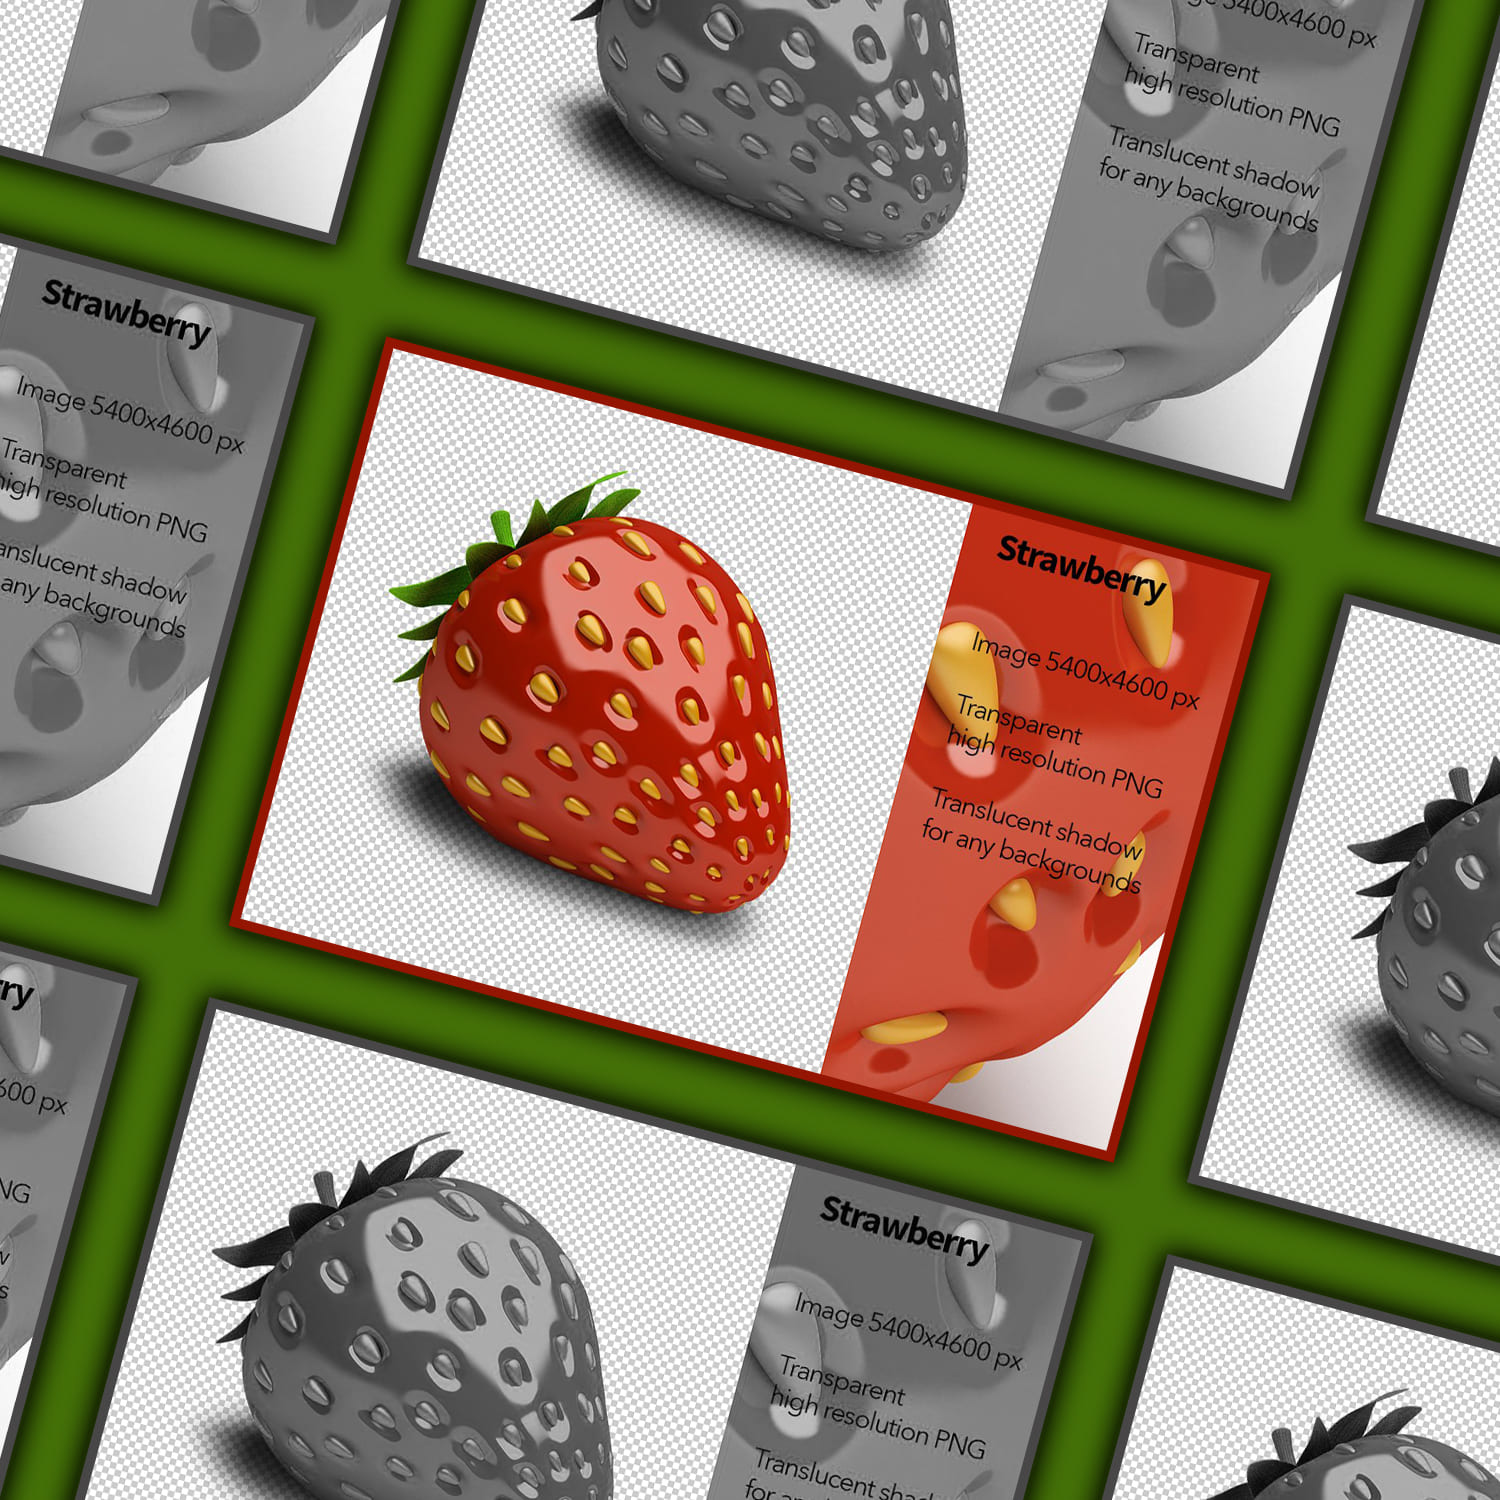 Diagonal pictures with images of strawberries.